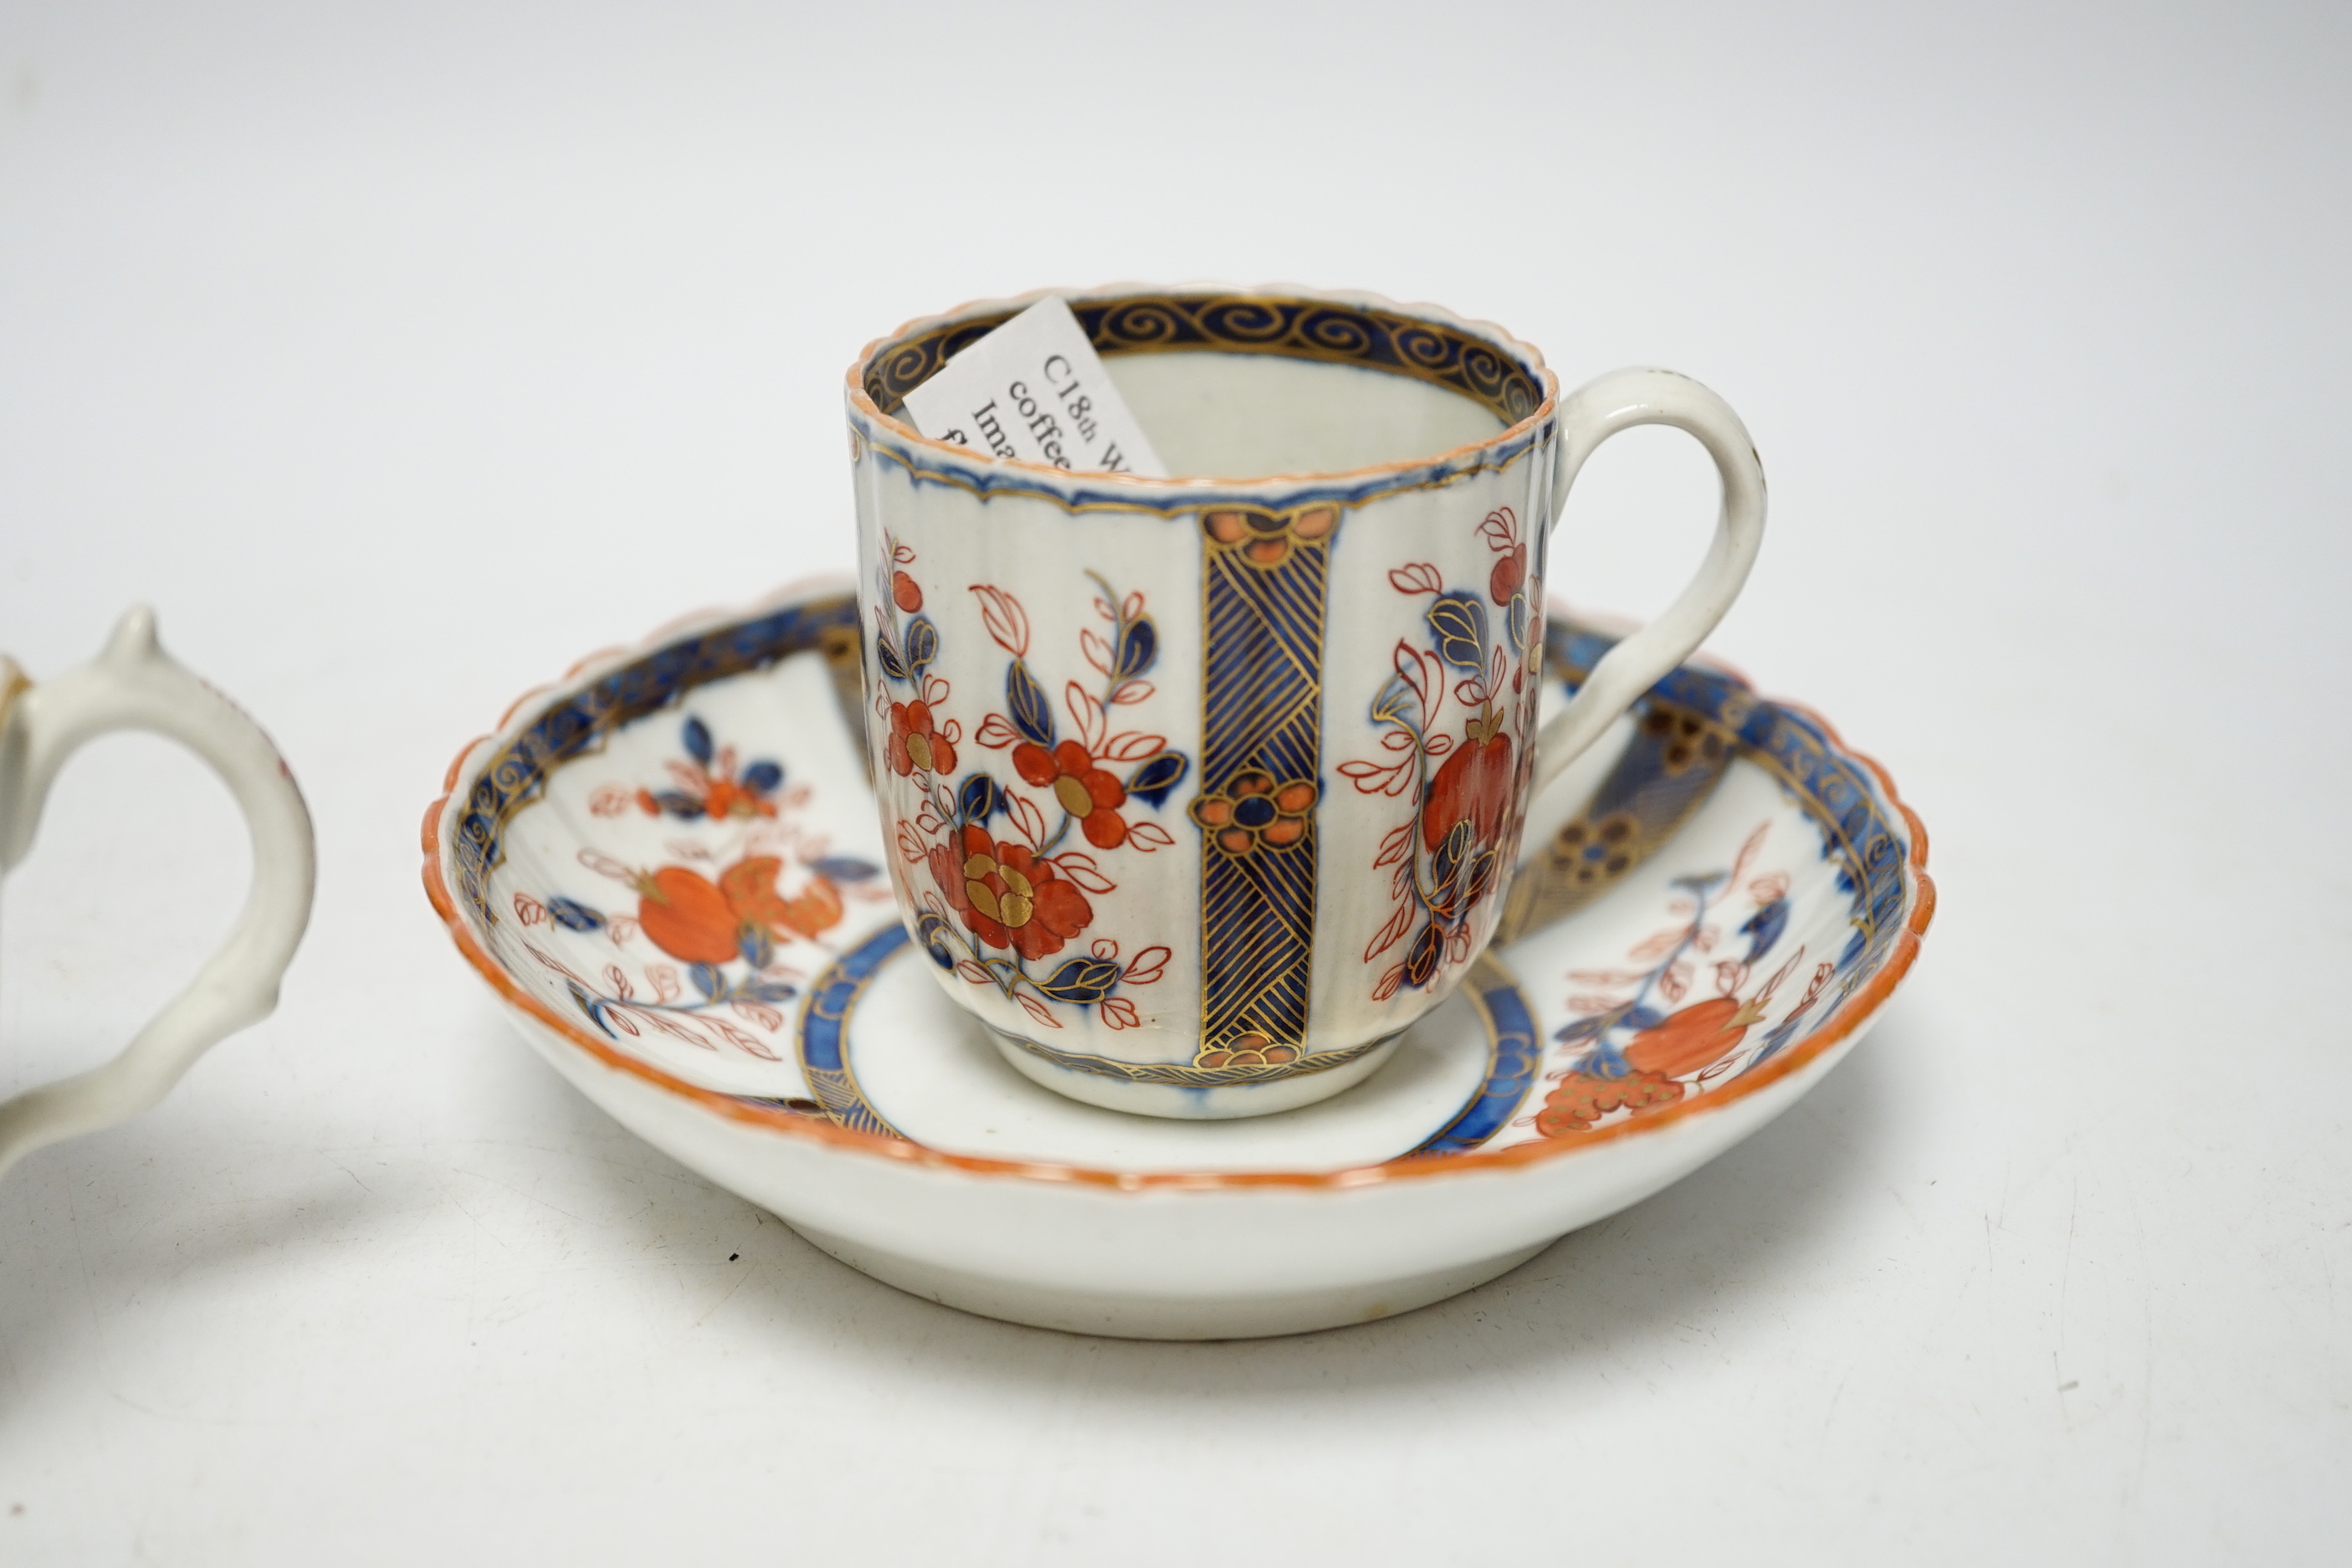 A Worcester ‘low Chelsea ewer’ milk jug, c.1770 and a Worcester Japan pattern coffee cup and saucer, c.1780, jug 6.5cm